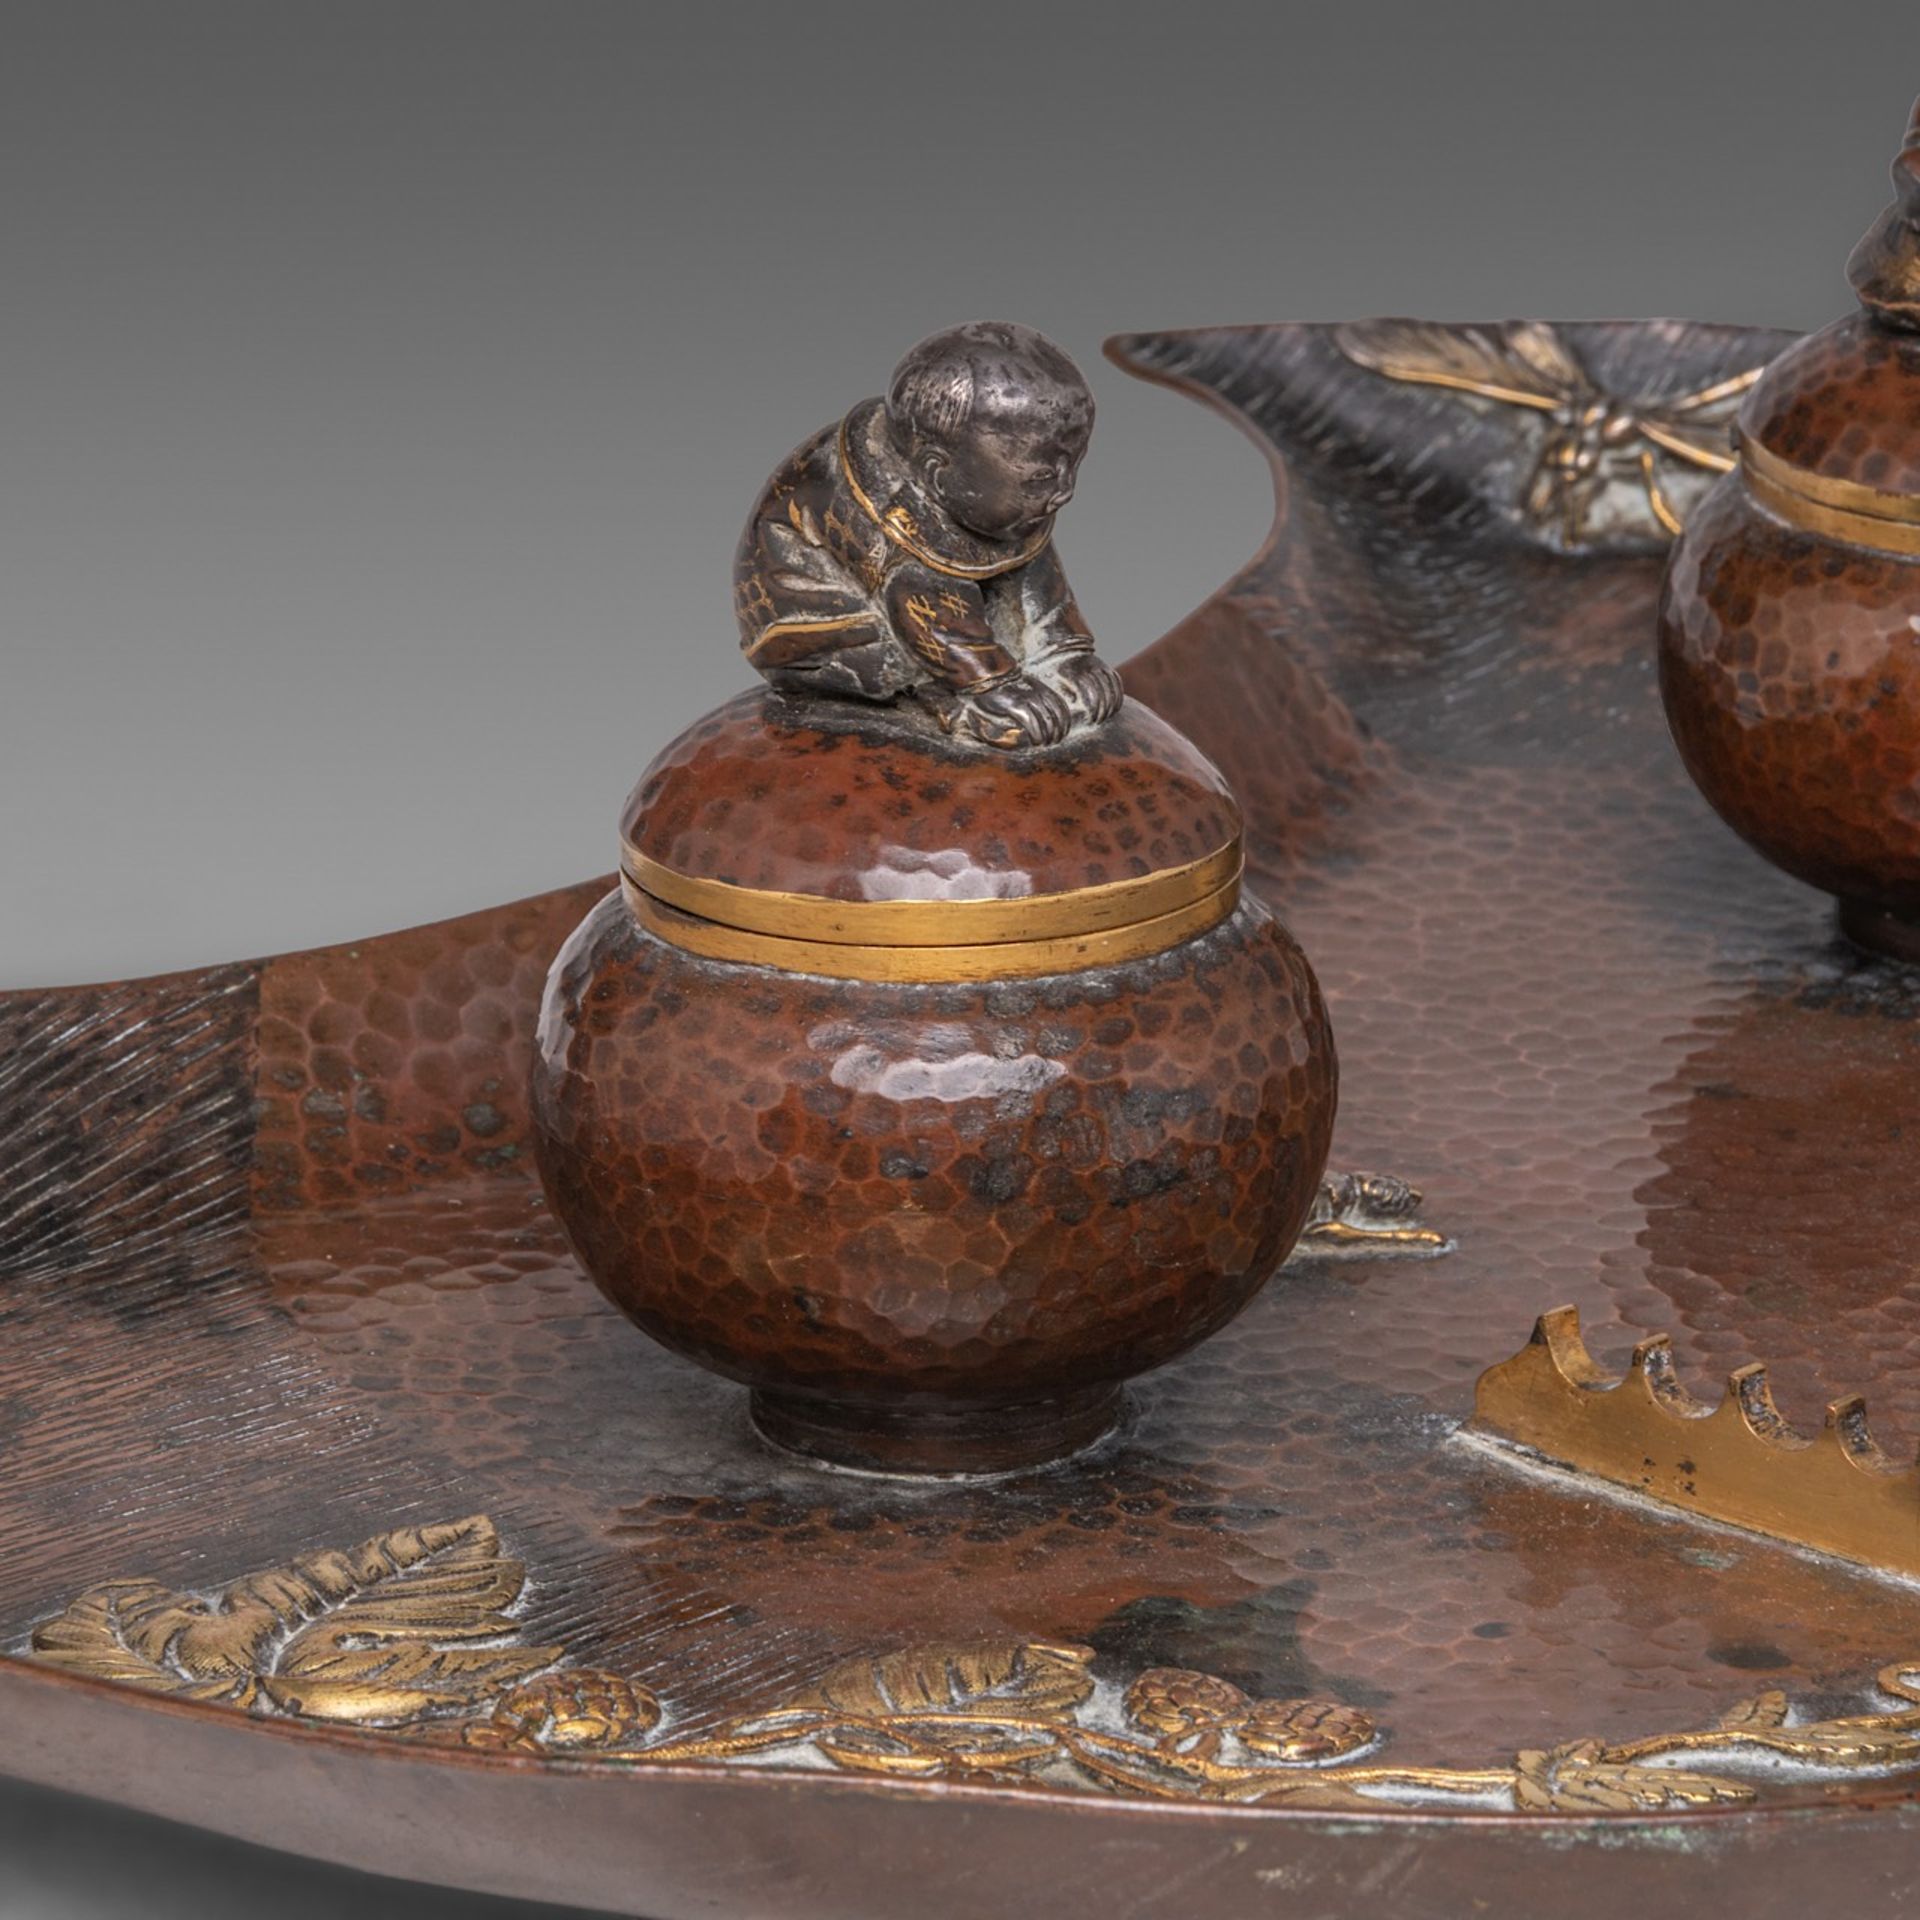 A Japanese writing set, with an inkwell, sand pot and penholder on a bronze crescent shaped-plate, M - Image 8 of 9